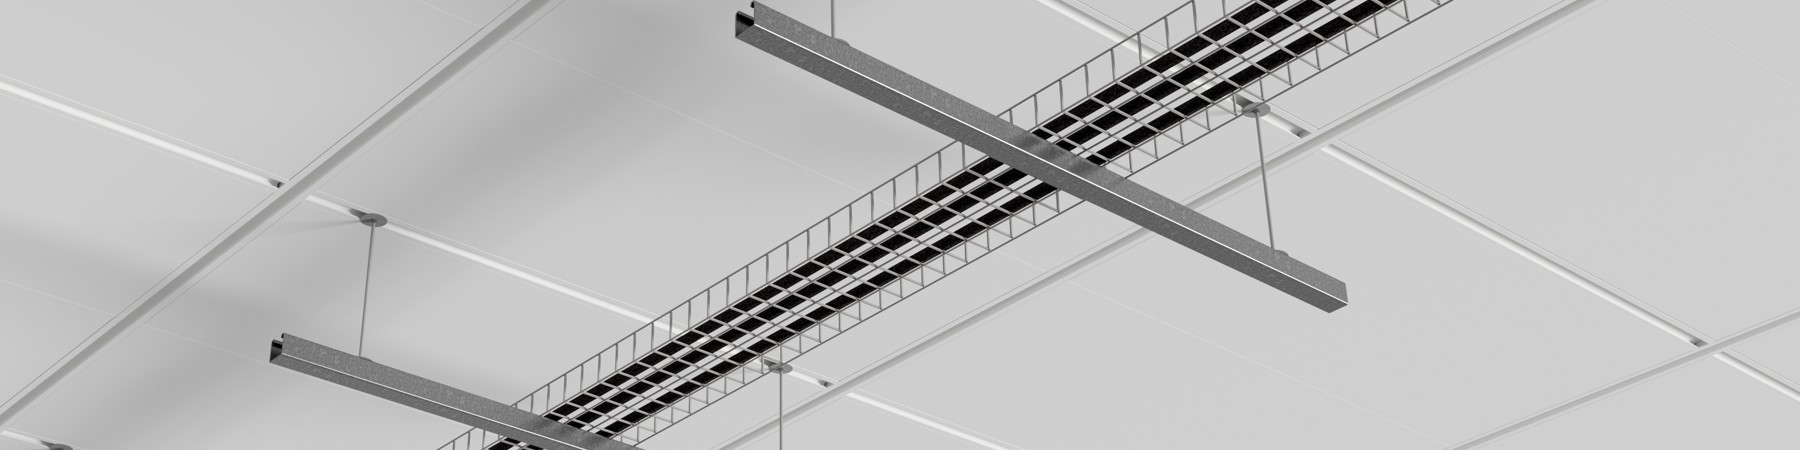 Data Ctr Cable Tray High Res Render